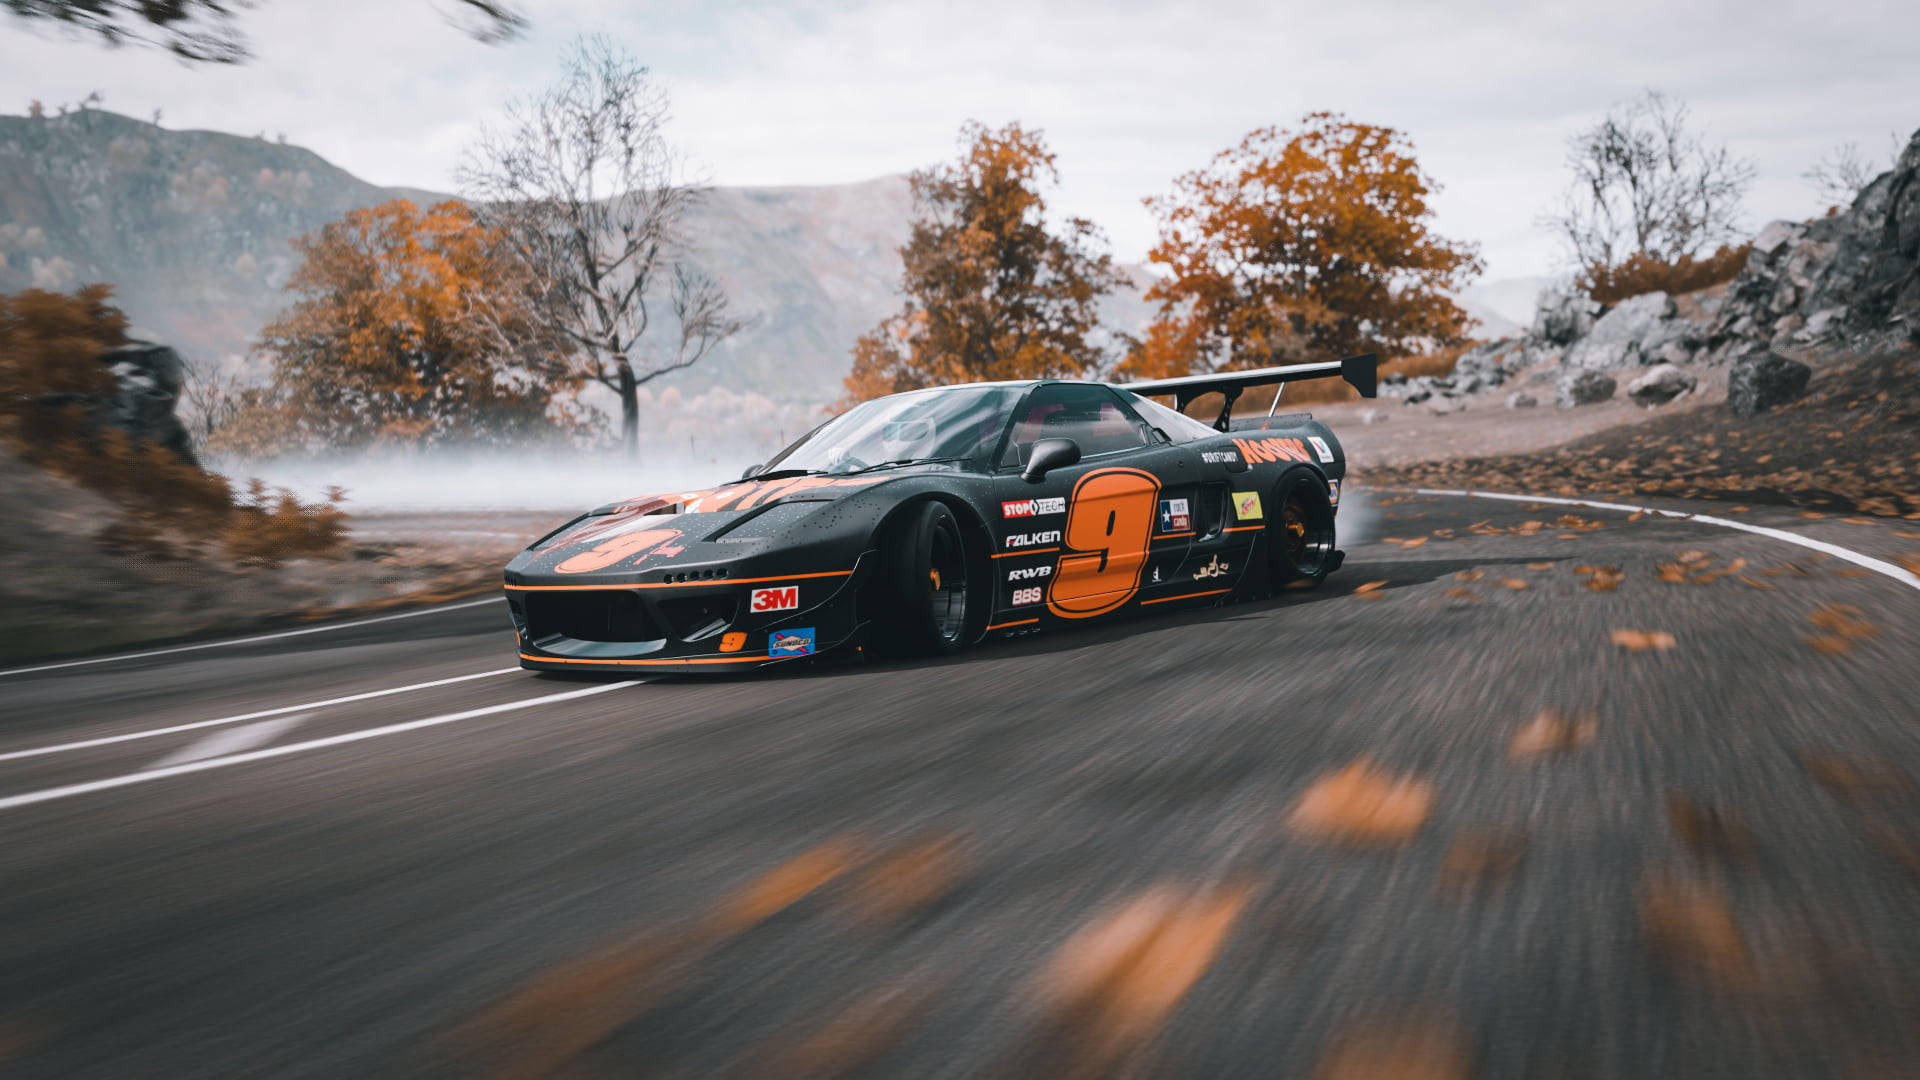 Caption: Stunning Orange And Black Honda Nsx Excelling In Drift Racing Background